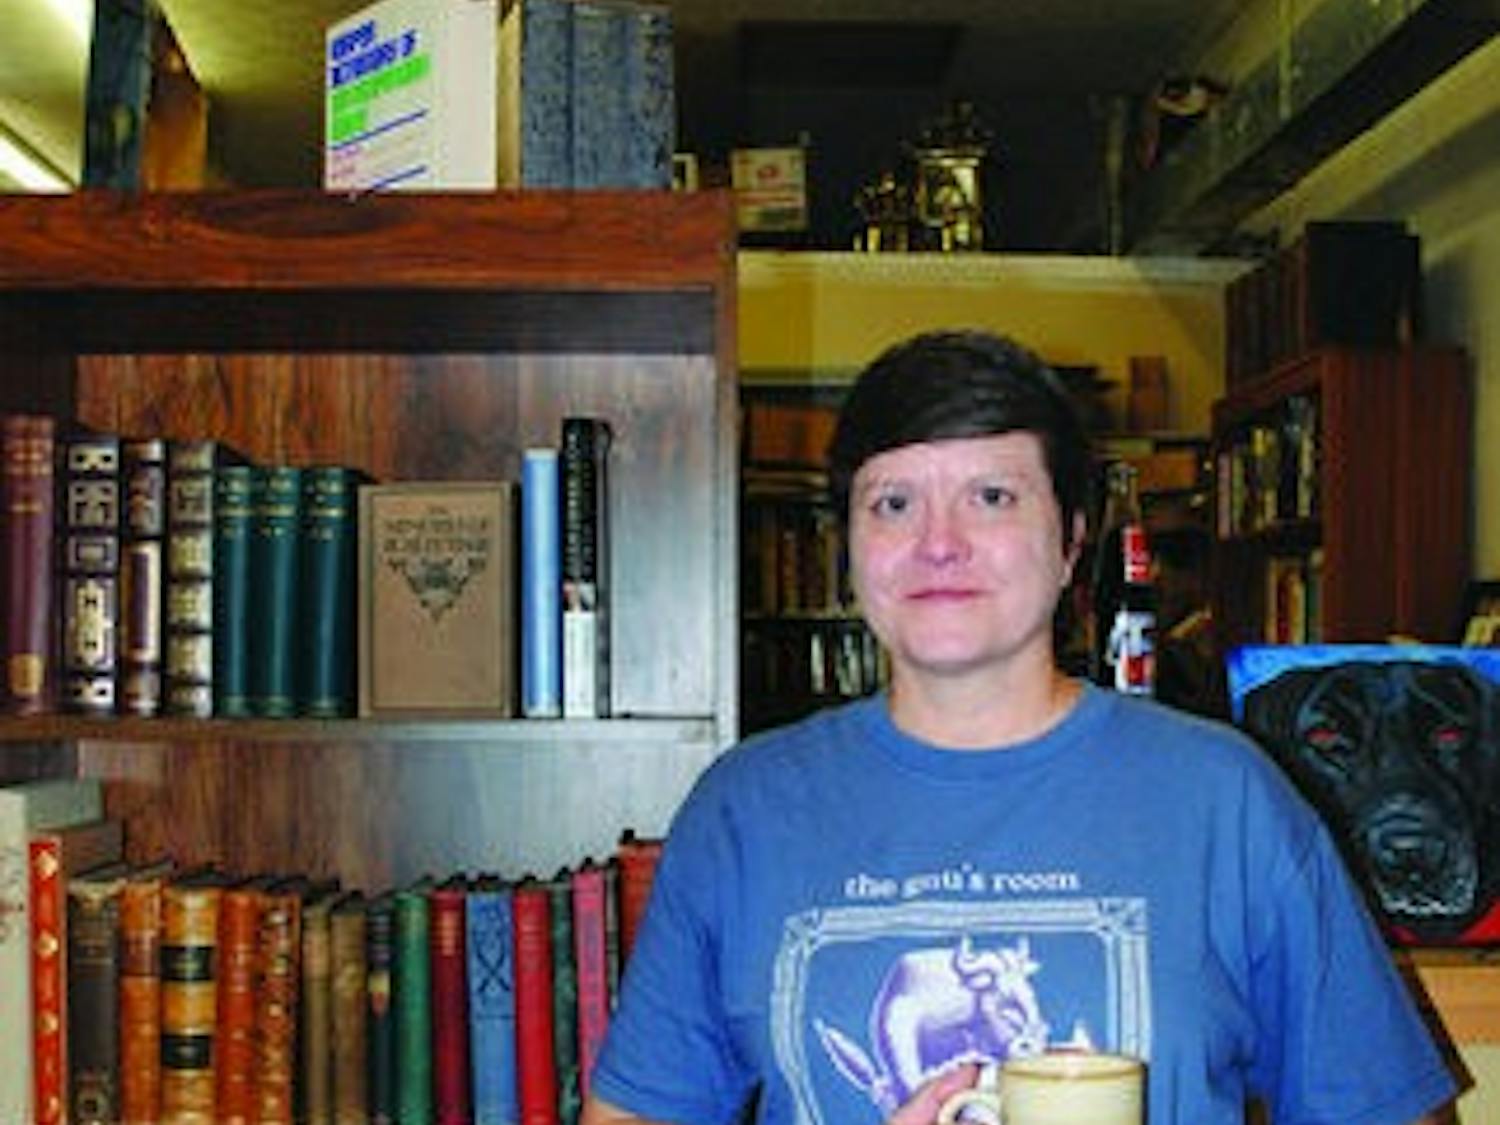 Tina Tatum graduated from Auburn in the '70s and now owns Gnu's Room bookstore. (Elaine Busby / Assistant Photo Editor)